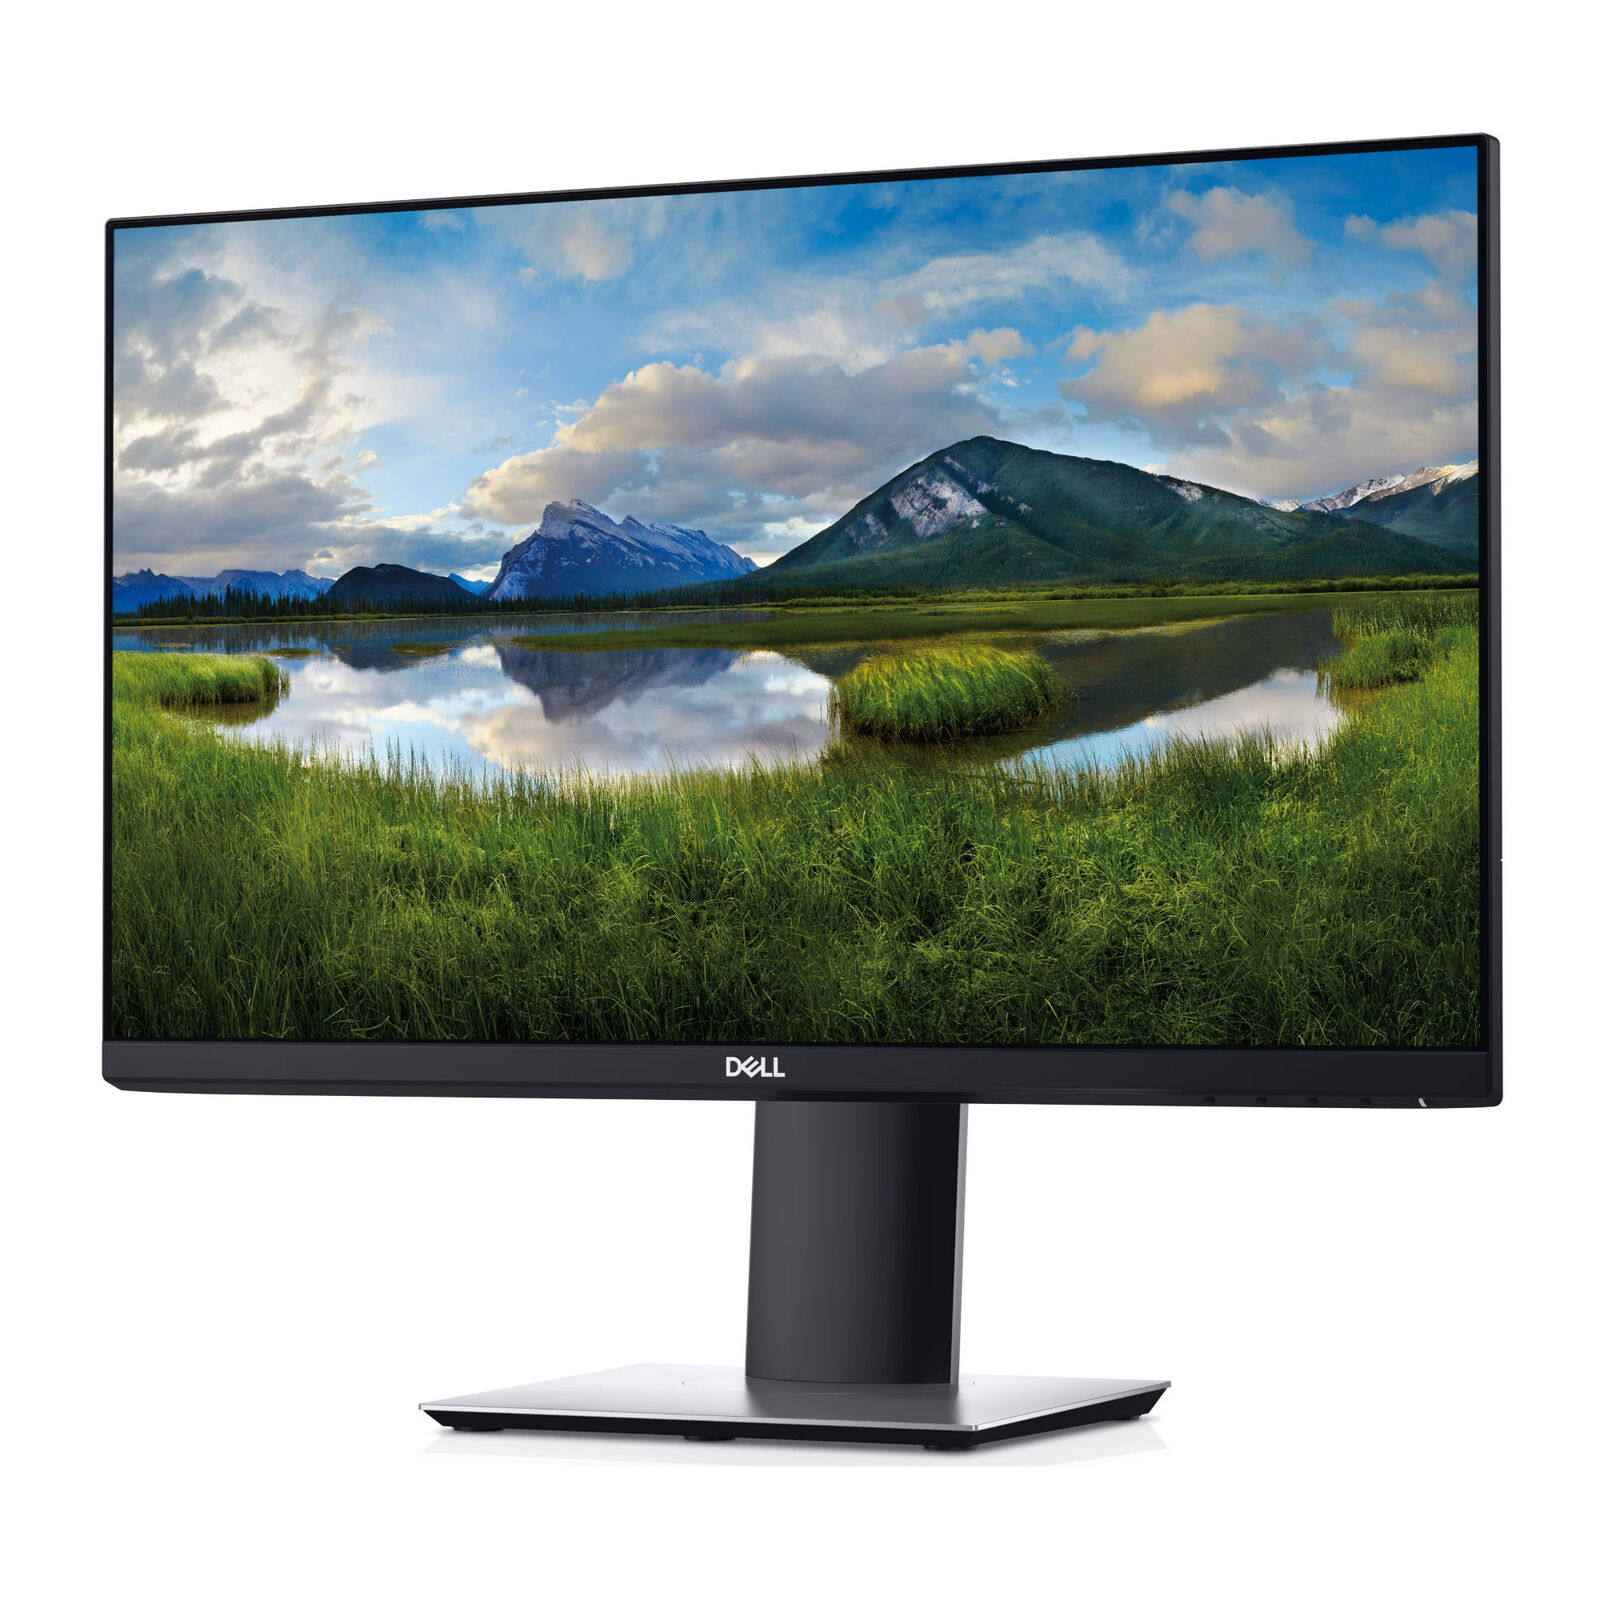 Dell P2319H 23 In Monitor Full HD 1920 x 1080 IPS Display with DP Renewed